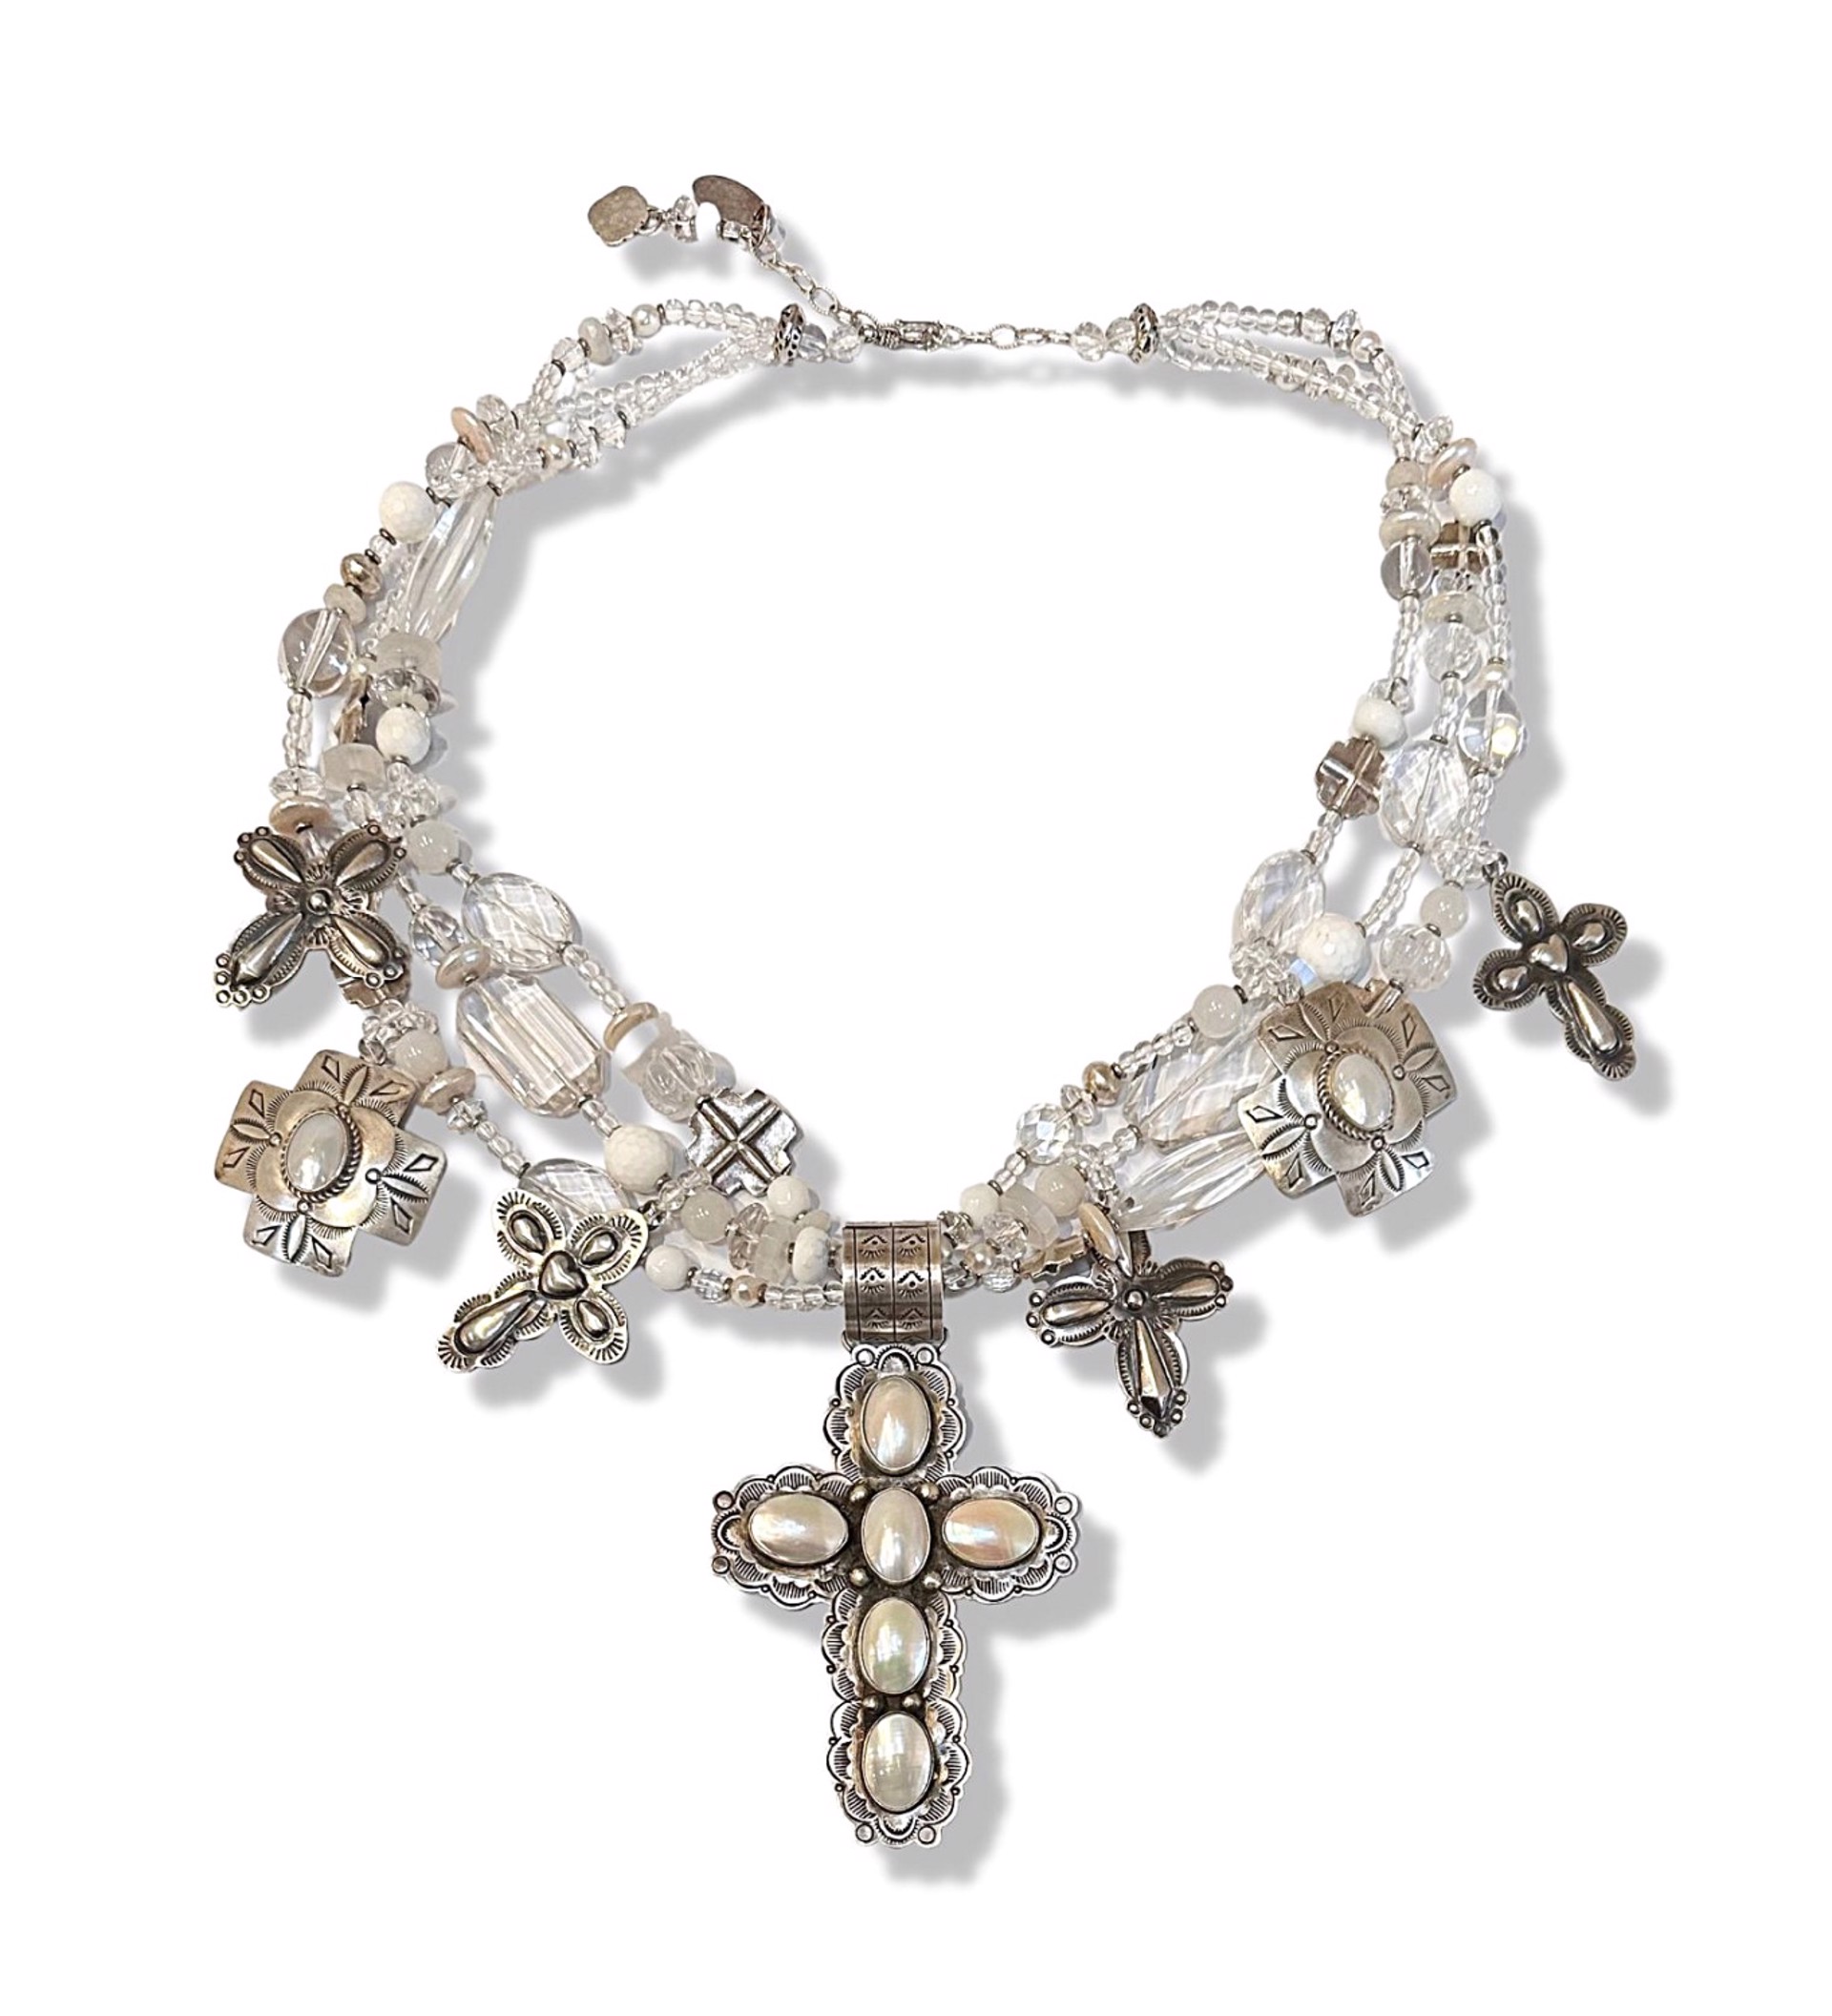 Necklace - 3 Strand Glass Beads with Sterling Crosses and Mother Pearl #43 by Kim Yubeta